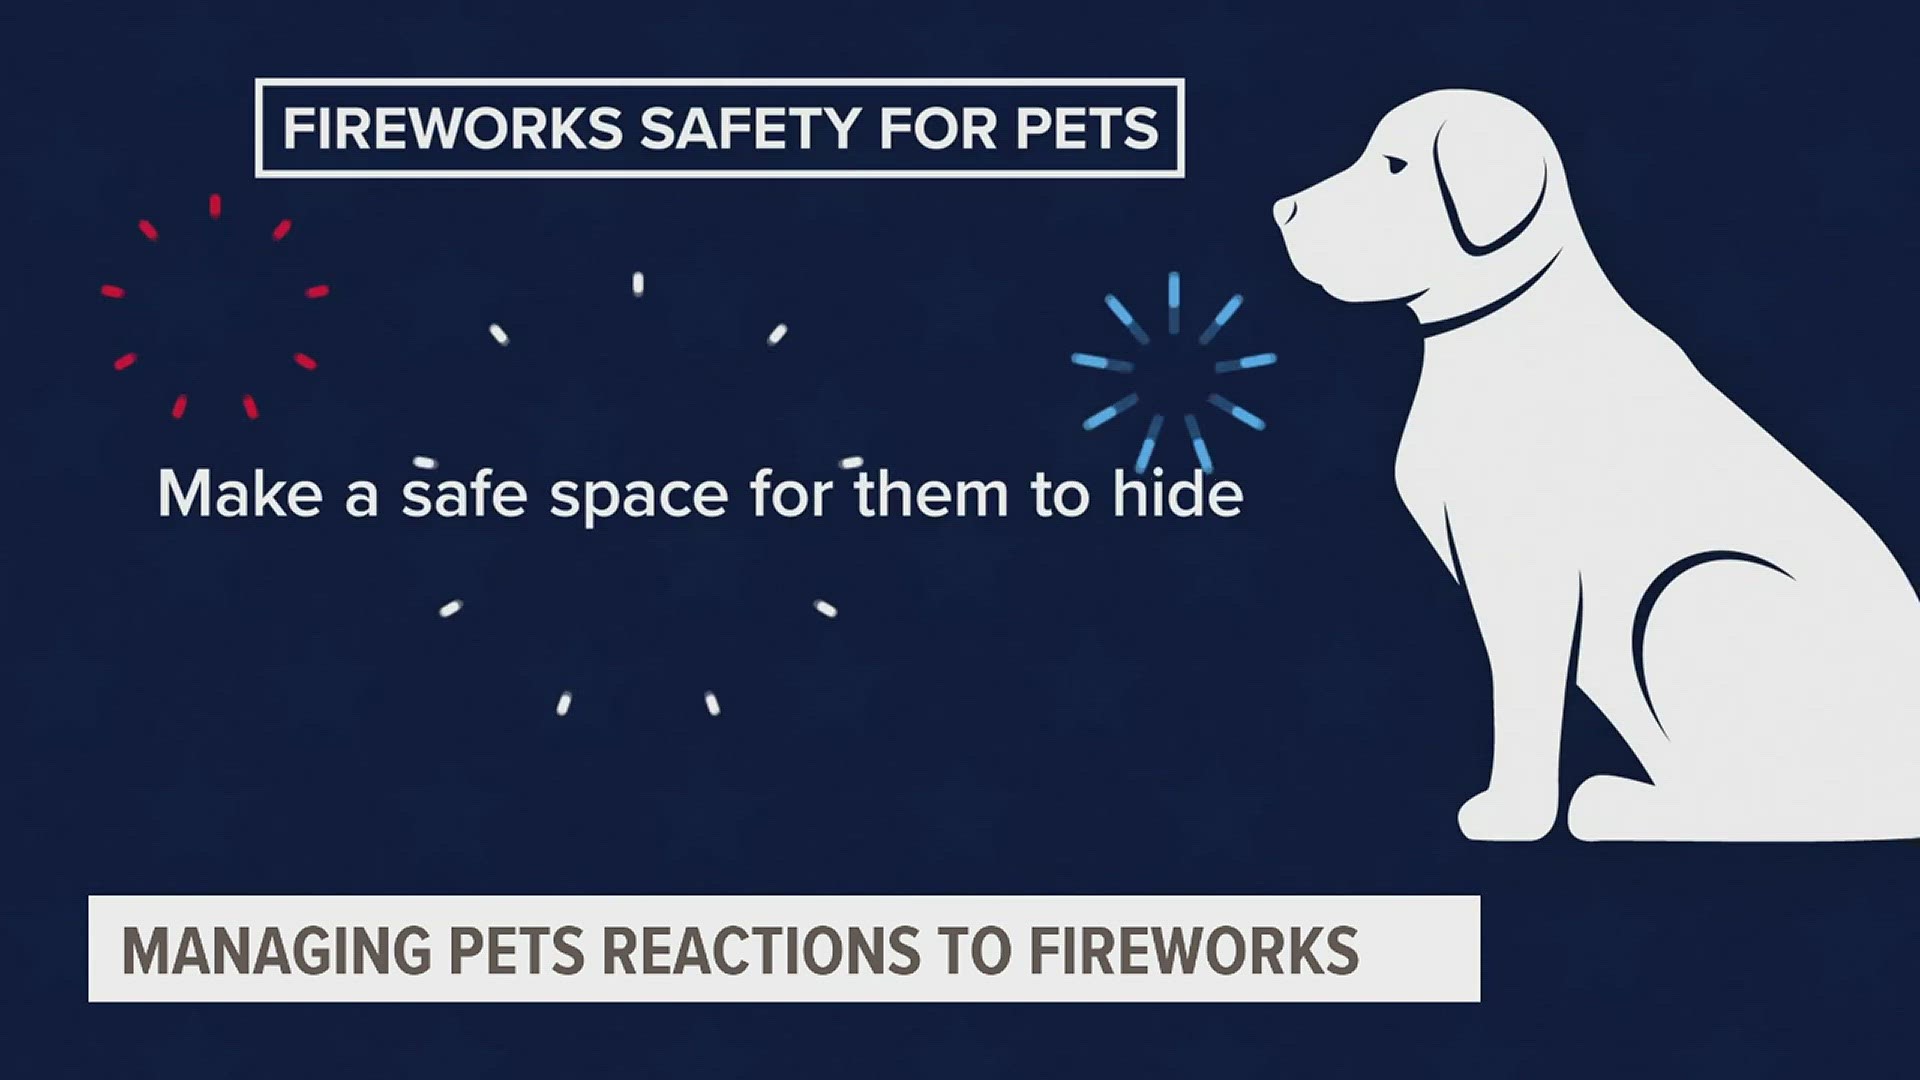 While fireworks are fun for humans, they can make many pets panic. Learn ways to help your pet get through the holiday calmly.